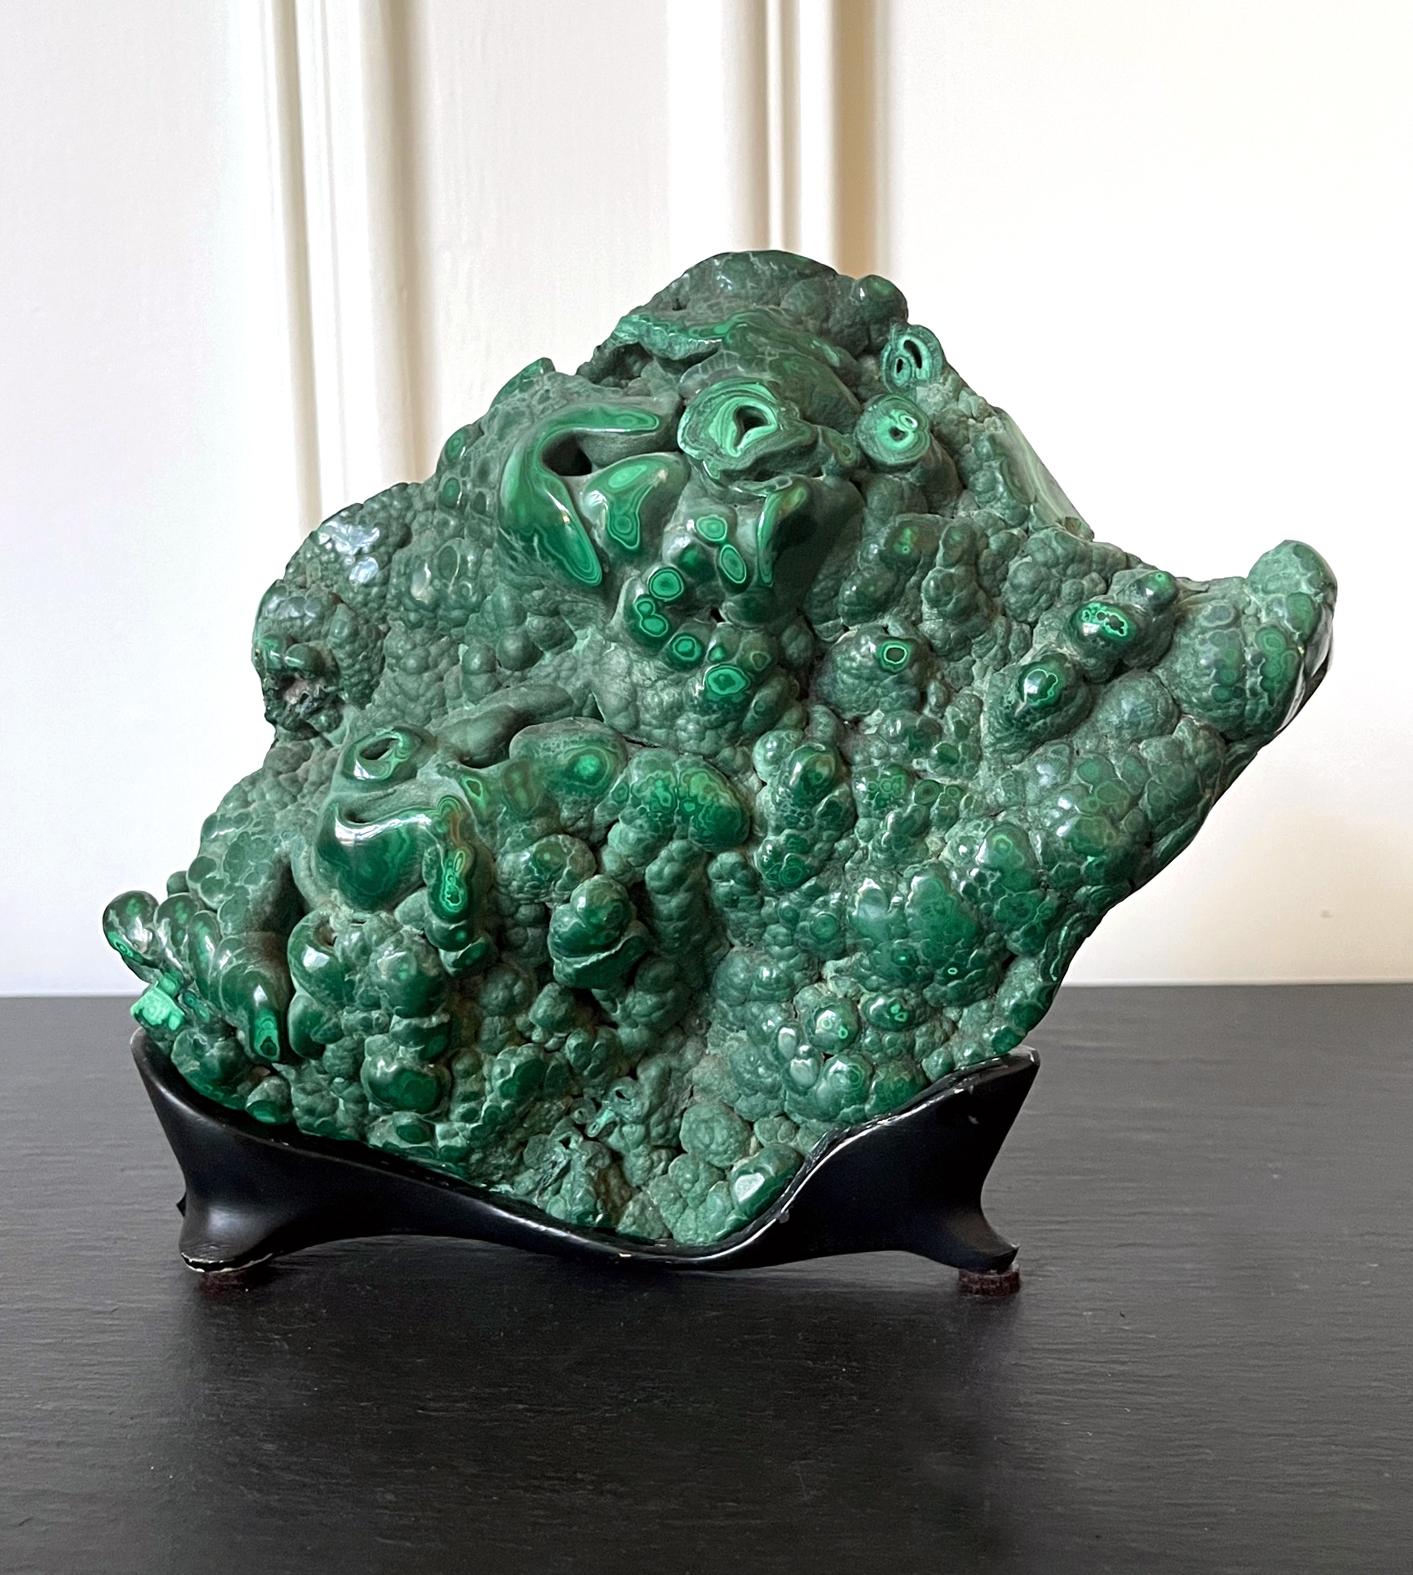 A natural malachite rock specimen with striking green and black colors fitted on a wood stand for viewing and meditating. The front of the gemstone features tight and small polished botryoidal form, revealing a beautiful, mottled pattern with